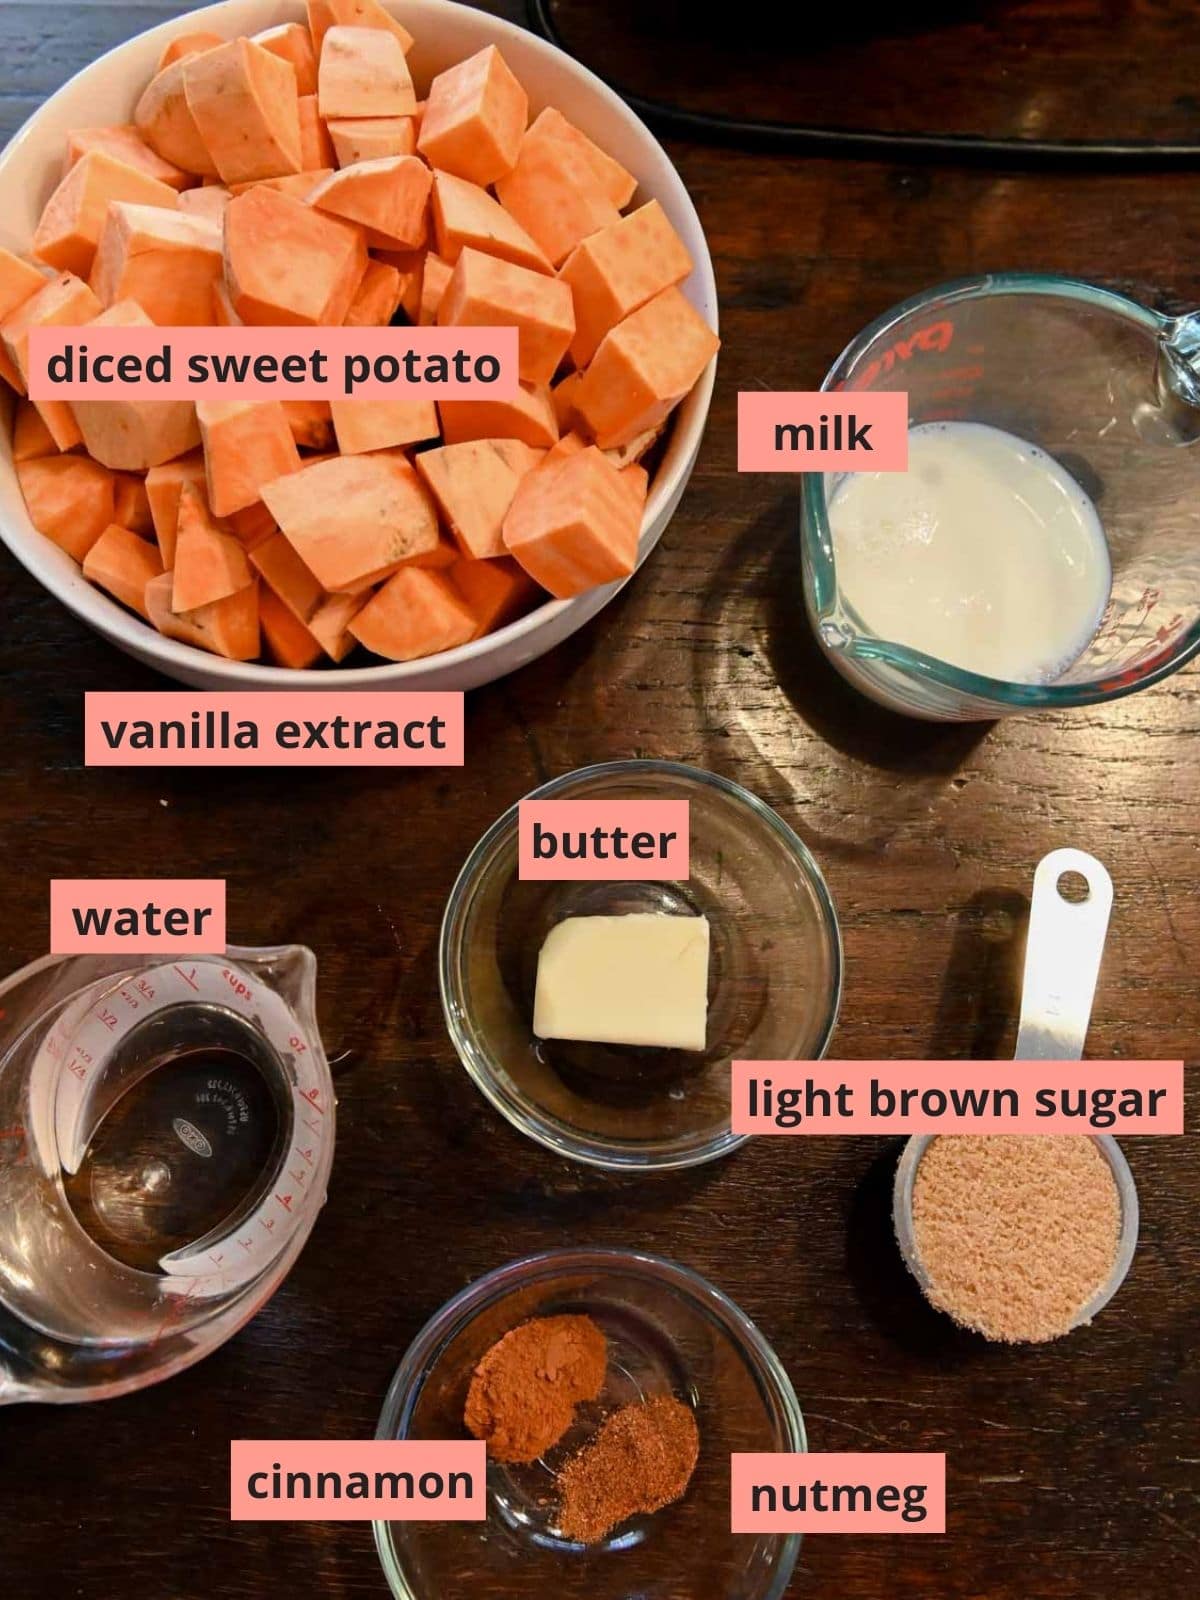 Labeled ingredients used to make mashed sweet potatoes